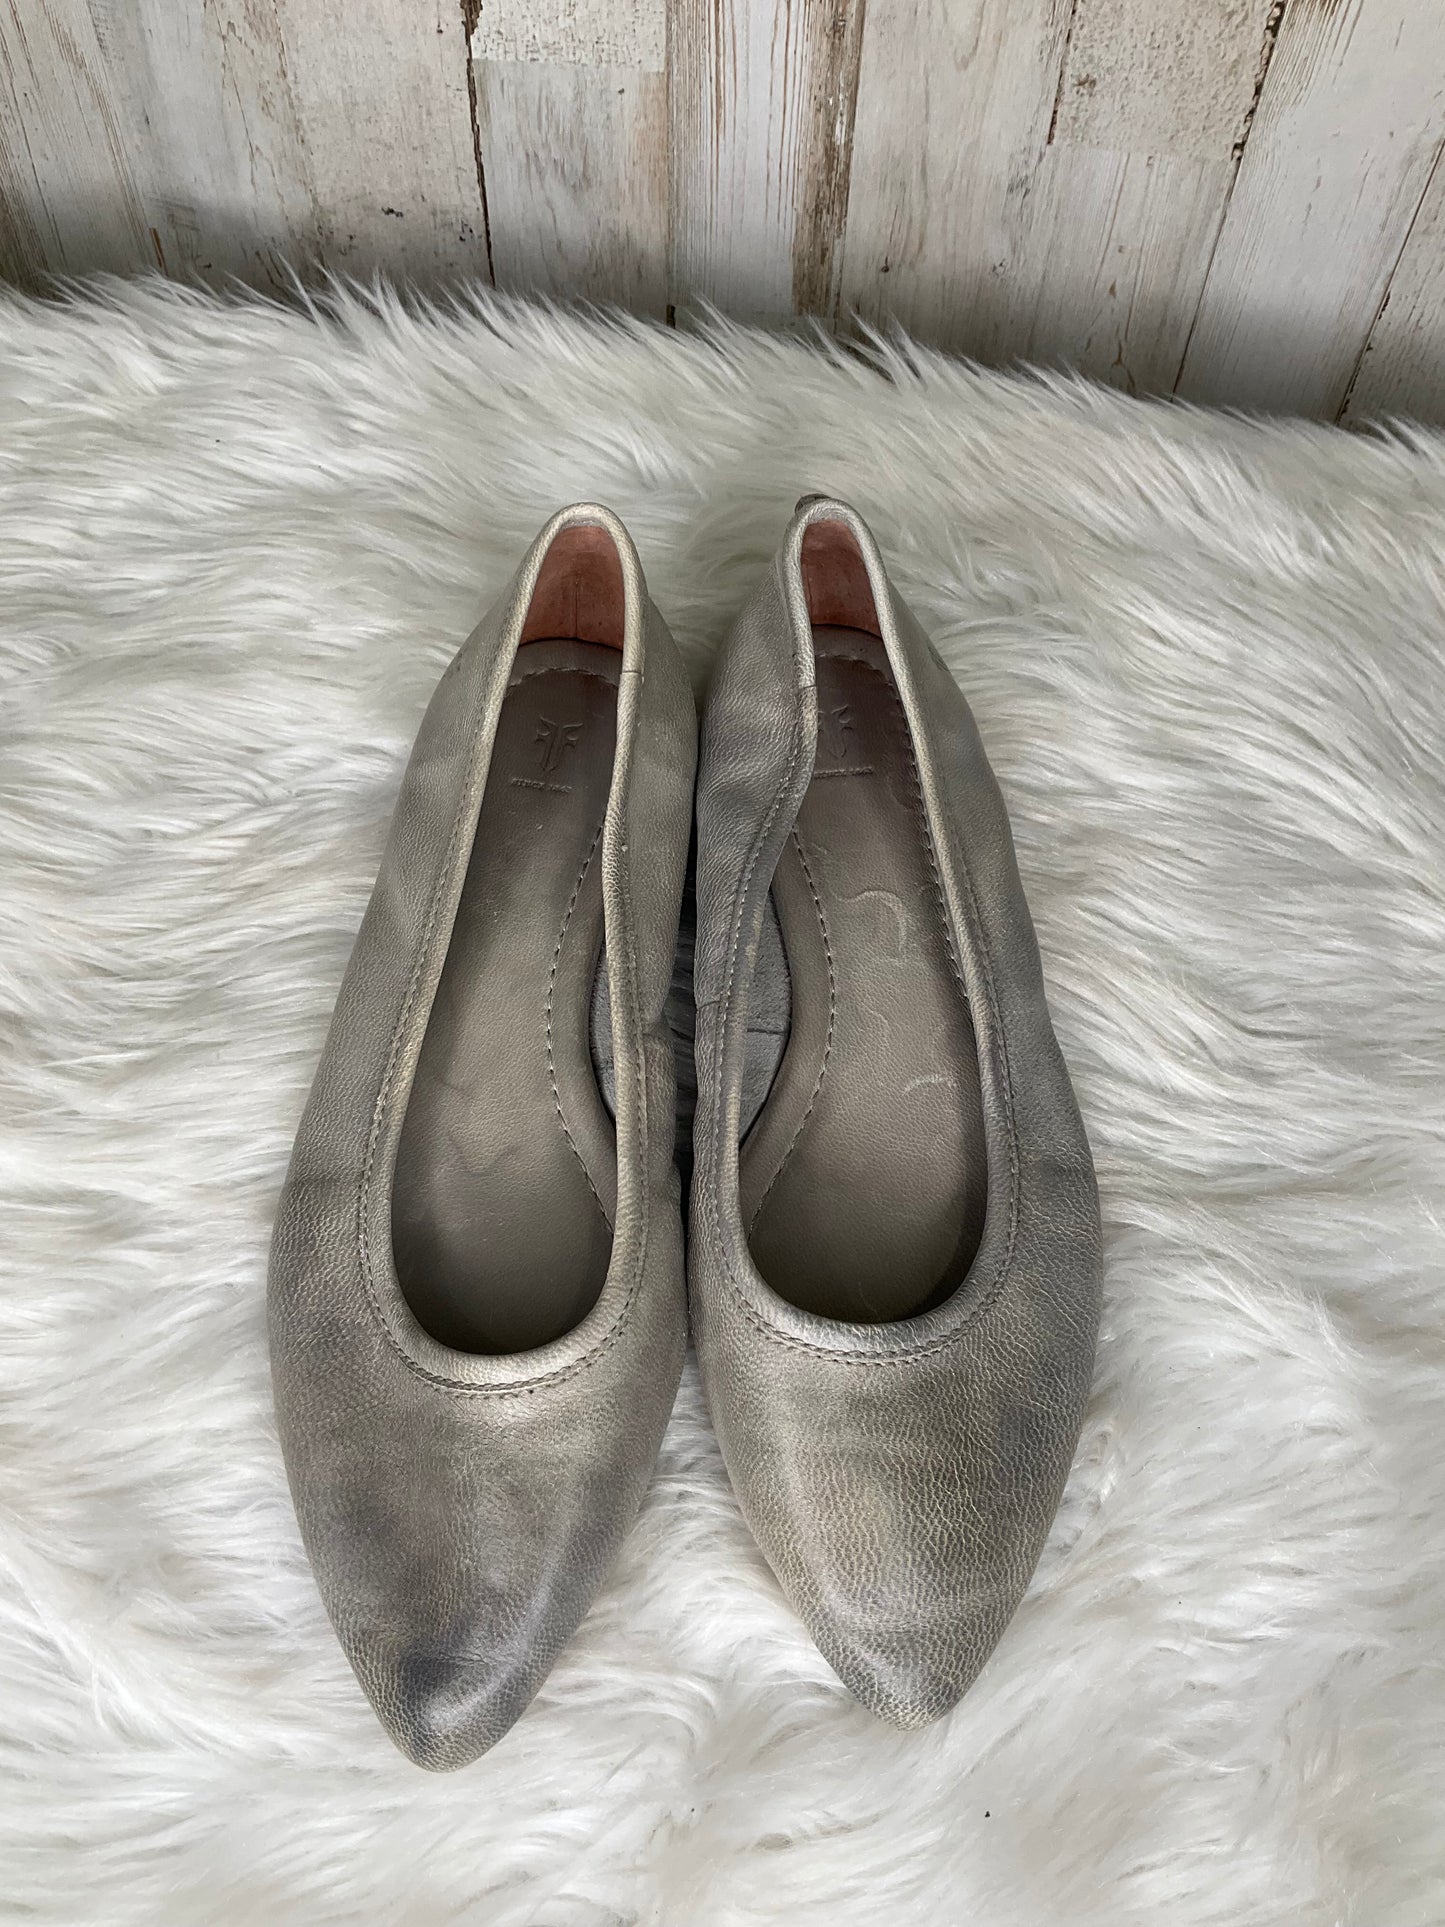 Shoes Flats By Frye  Size: 6.5